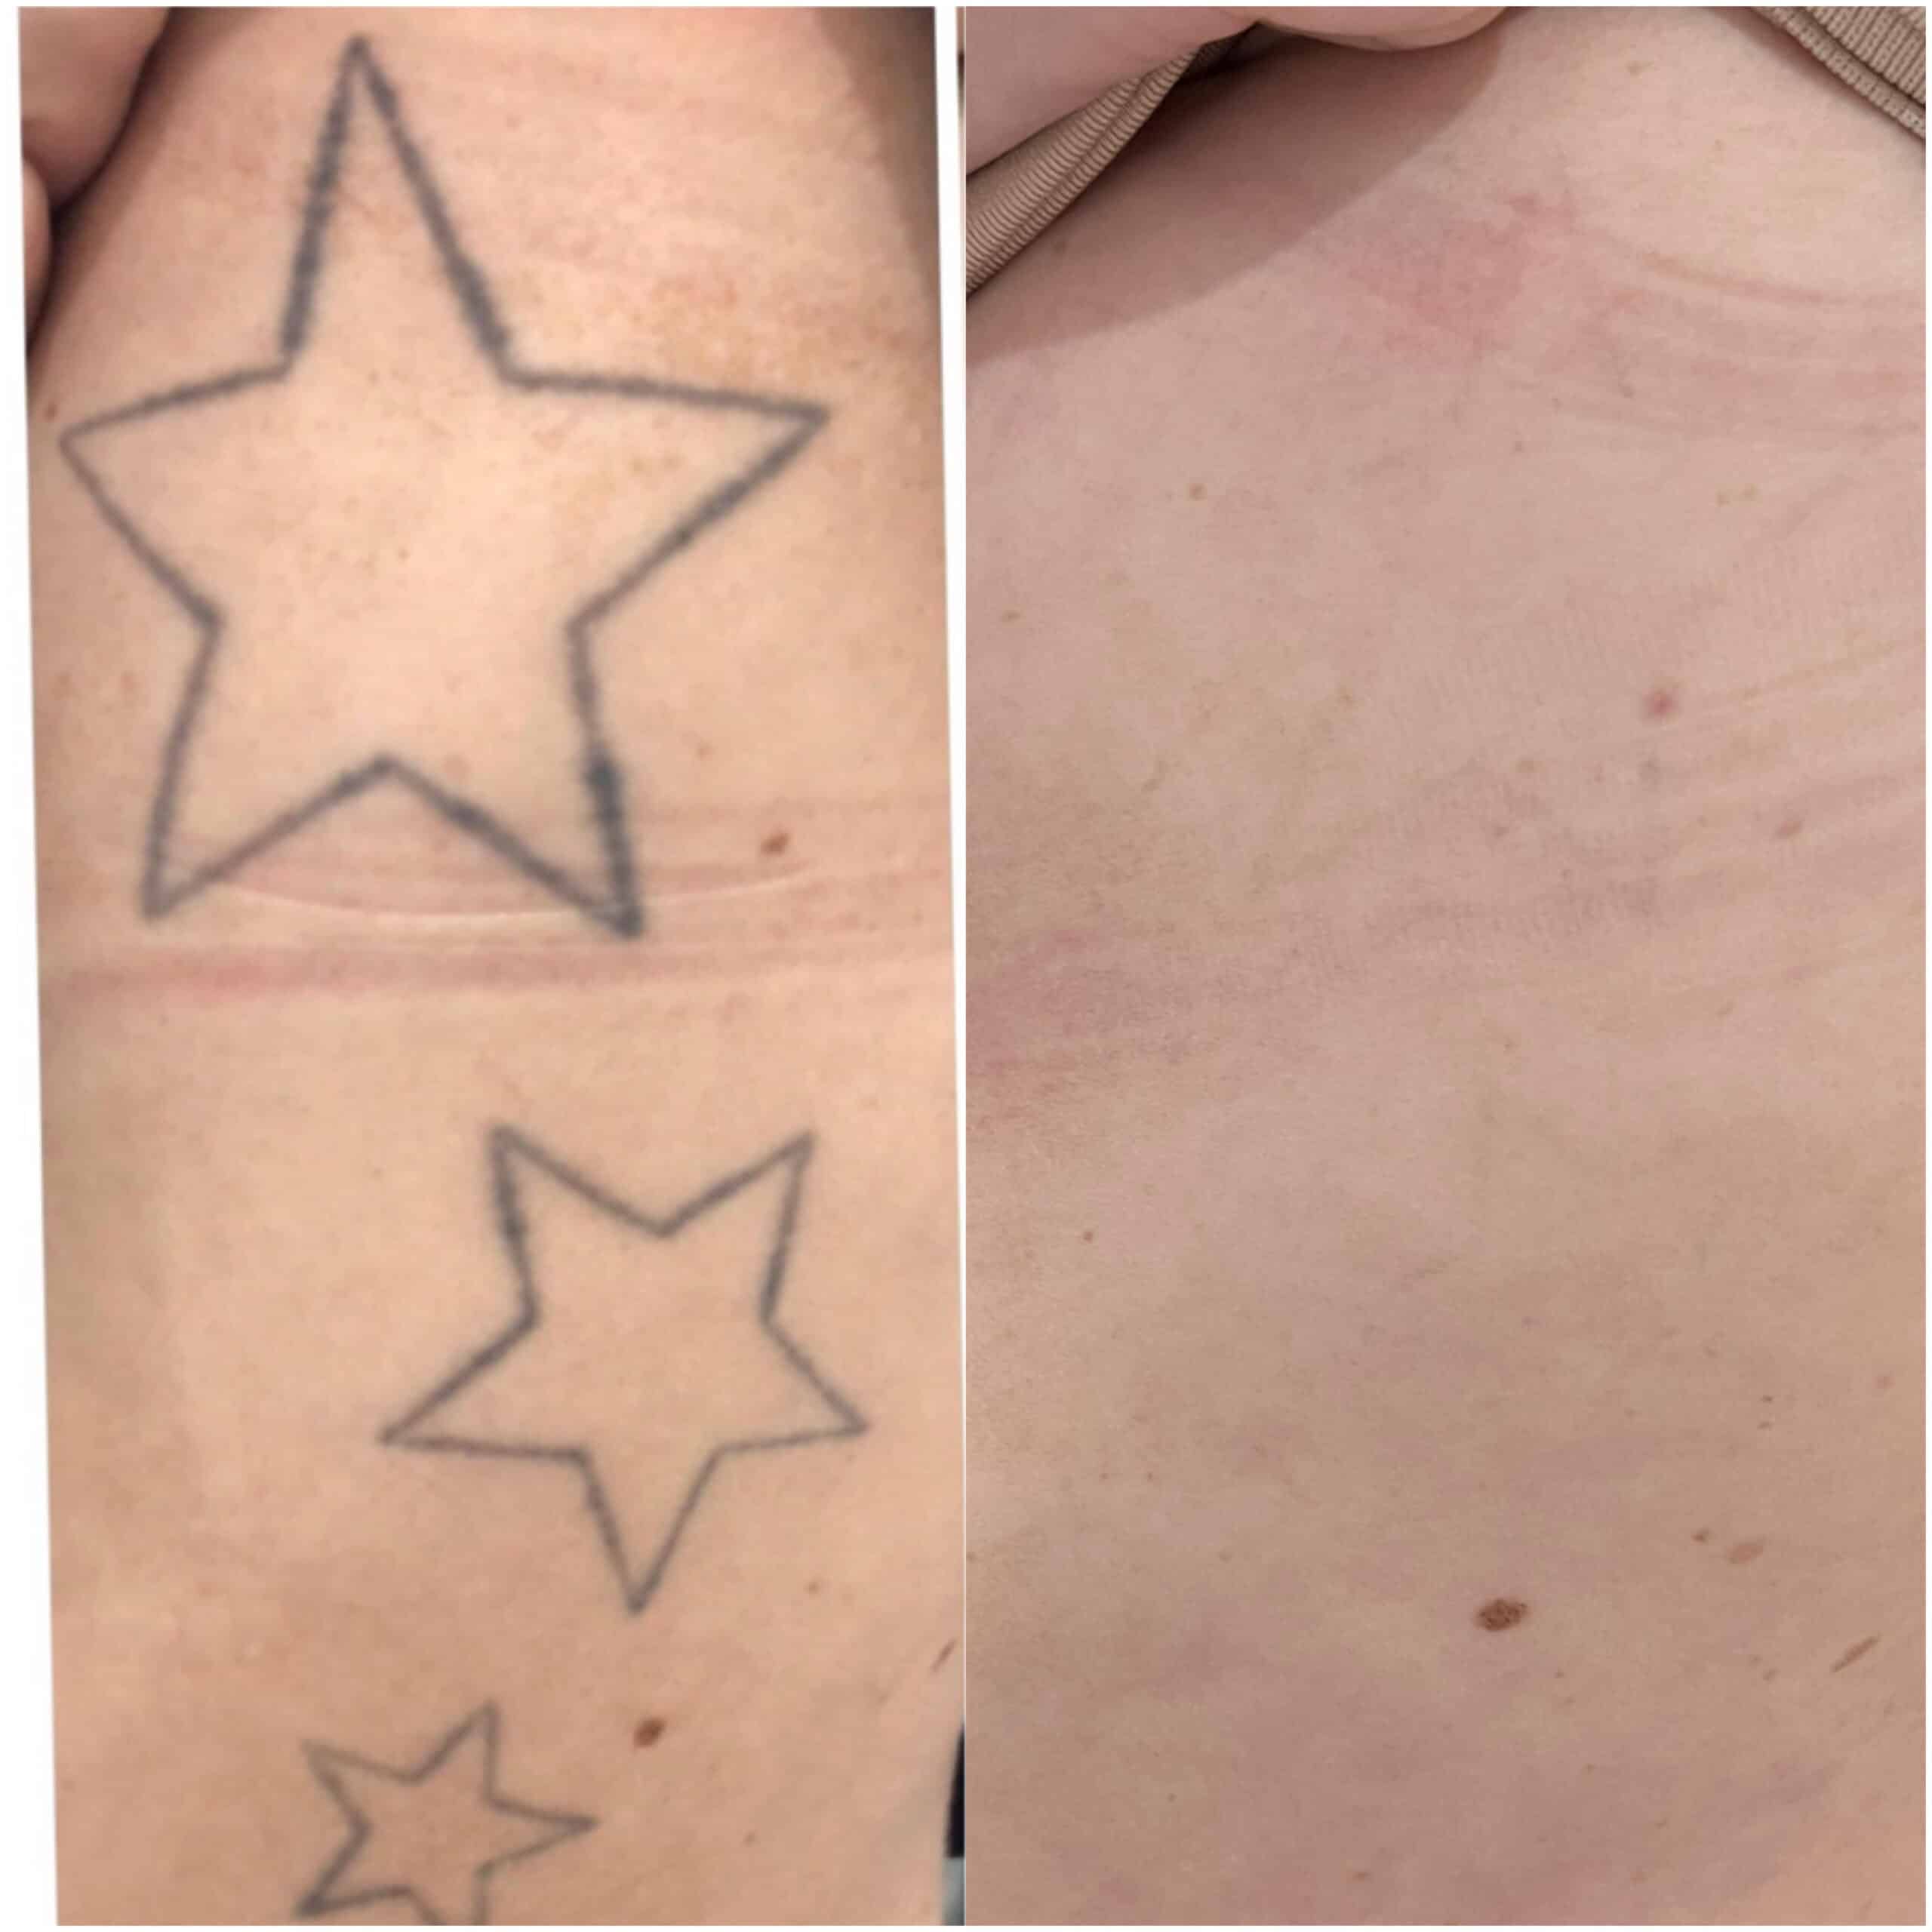 How Does Tattoo Removal Work? - Dermatology Center of Acadiana